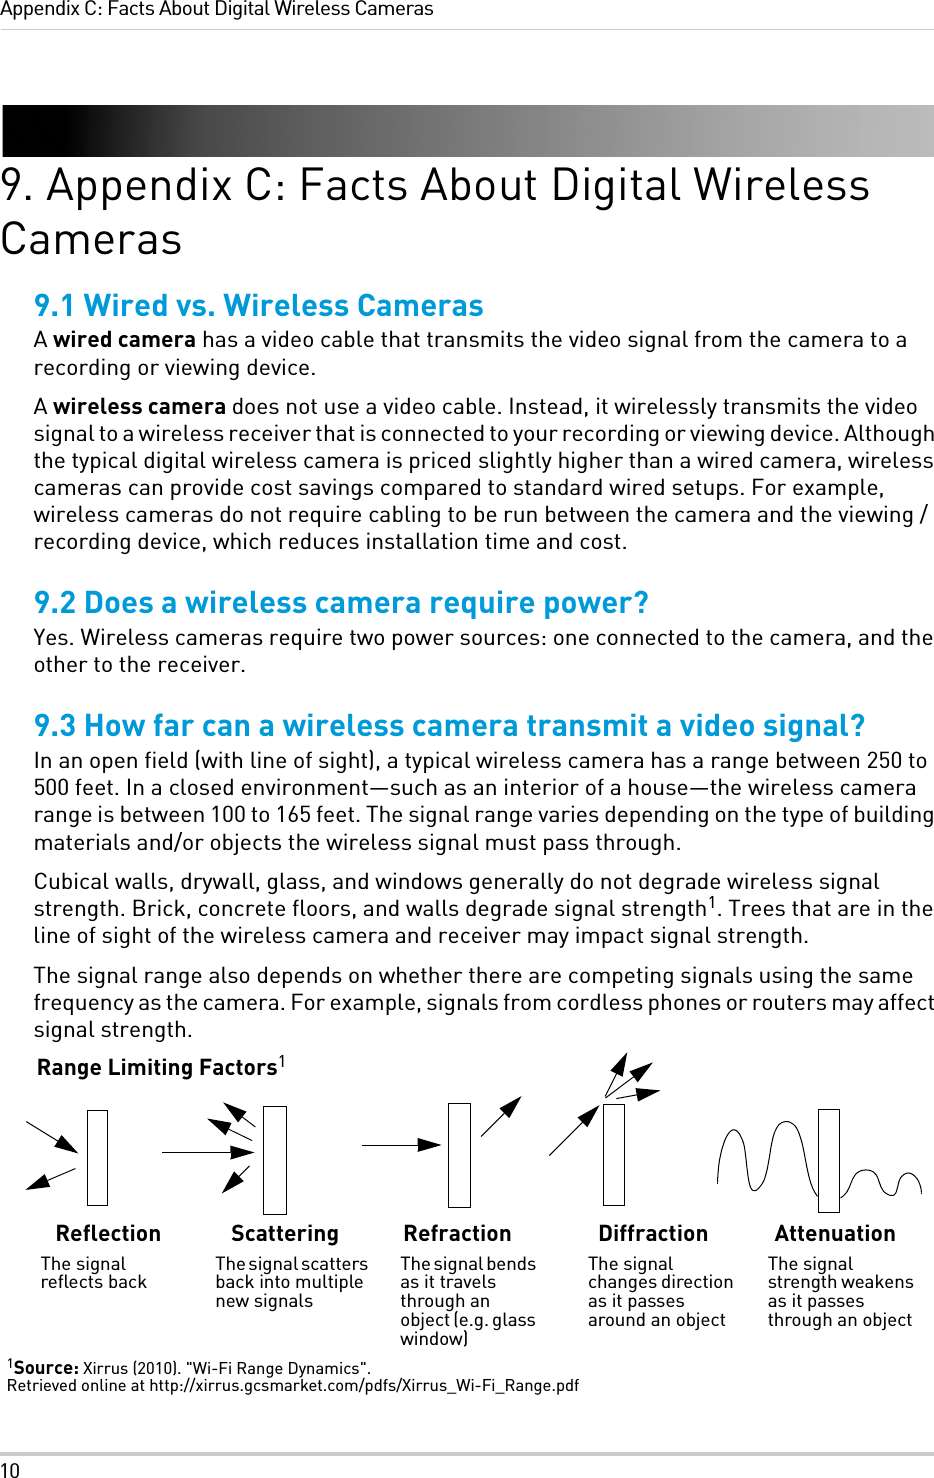 10Appendix C: Facts About Digital Wireless Cameras9. Appendix C: Facts About Digital Wireless Cameras9.1 Wired vs. Wireless CamerasA wired camera has a video cable that transmits the video signal from the camera to a recording or viewing device.A wireless camera does not use a video cable. Instead, it wirelessly transmits the video signal to a wireless receiver that is connected to your recording or viewing device. Although the typical digital wireless camera is priced slightly higher than a wired camera, wireless cameras can provide cost savings compared to standard wired setups. For example, wireless cameras do not require cabling to be run between the camera and the viewing / recording device, which reduces installation time and cost.9.2 Does a wireless camera require power?Yes. Wireless cameras require two power sources: one connected to the camera, and the other to the receiver. 9.3 How far can a wireless camera transmit a video signal?In an open field (with line of sight), a typical wireless camera has a range between 250 to 500 feet. In a closed environment—such as an interior of a house—the wireless camera range is between 100 to 165 feet. The signal range varies depending on the type of building materials and/or objects the wireless signal must pass through. Cubical walls, drywall, glass, and windows generally do not degrade wireless signal strength. Brick, concrete floors, and walls degrade signal strength1. Trees that are in the line of sight of the wireless camera and receiver may impact signal strength. The signal range also depends on whether there are competing signals using the same frequency as the camera. For example, signals from cordless phones or routers may affect signal strength.Range Limiting Factors1ReflectionThe signal reflects backScatteringThe signal scatters back into multiple new signalsRefractionThe signal bends as it travels through an object (e.g. glass window)DiffractionThe signal changes direction as it passes around an objectAttenuationThe signal strength weakens as it passes through an object1Source: Xirrus (2010). &quot;Wi-Fi Range Dynamics&quot;. Retrieved online at http://xirrus.gcsmarket.com/pdfs/Xirrus_Wi-Fi_Range.pdf